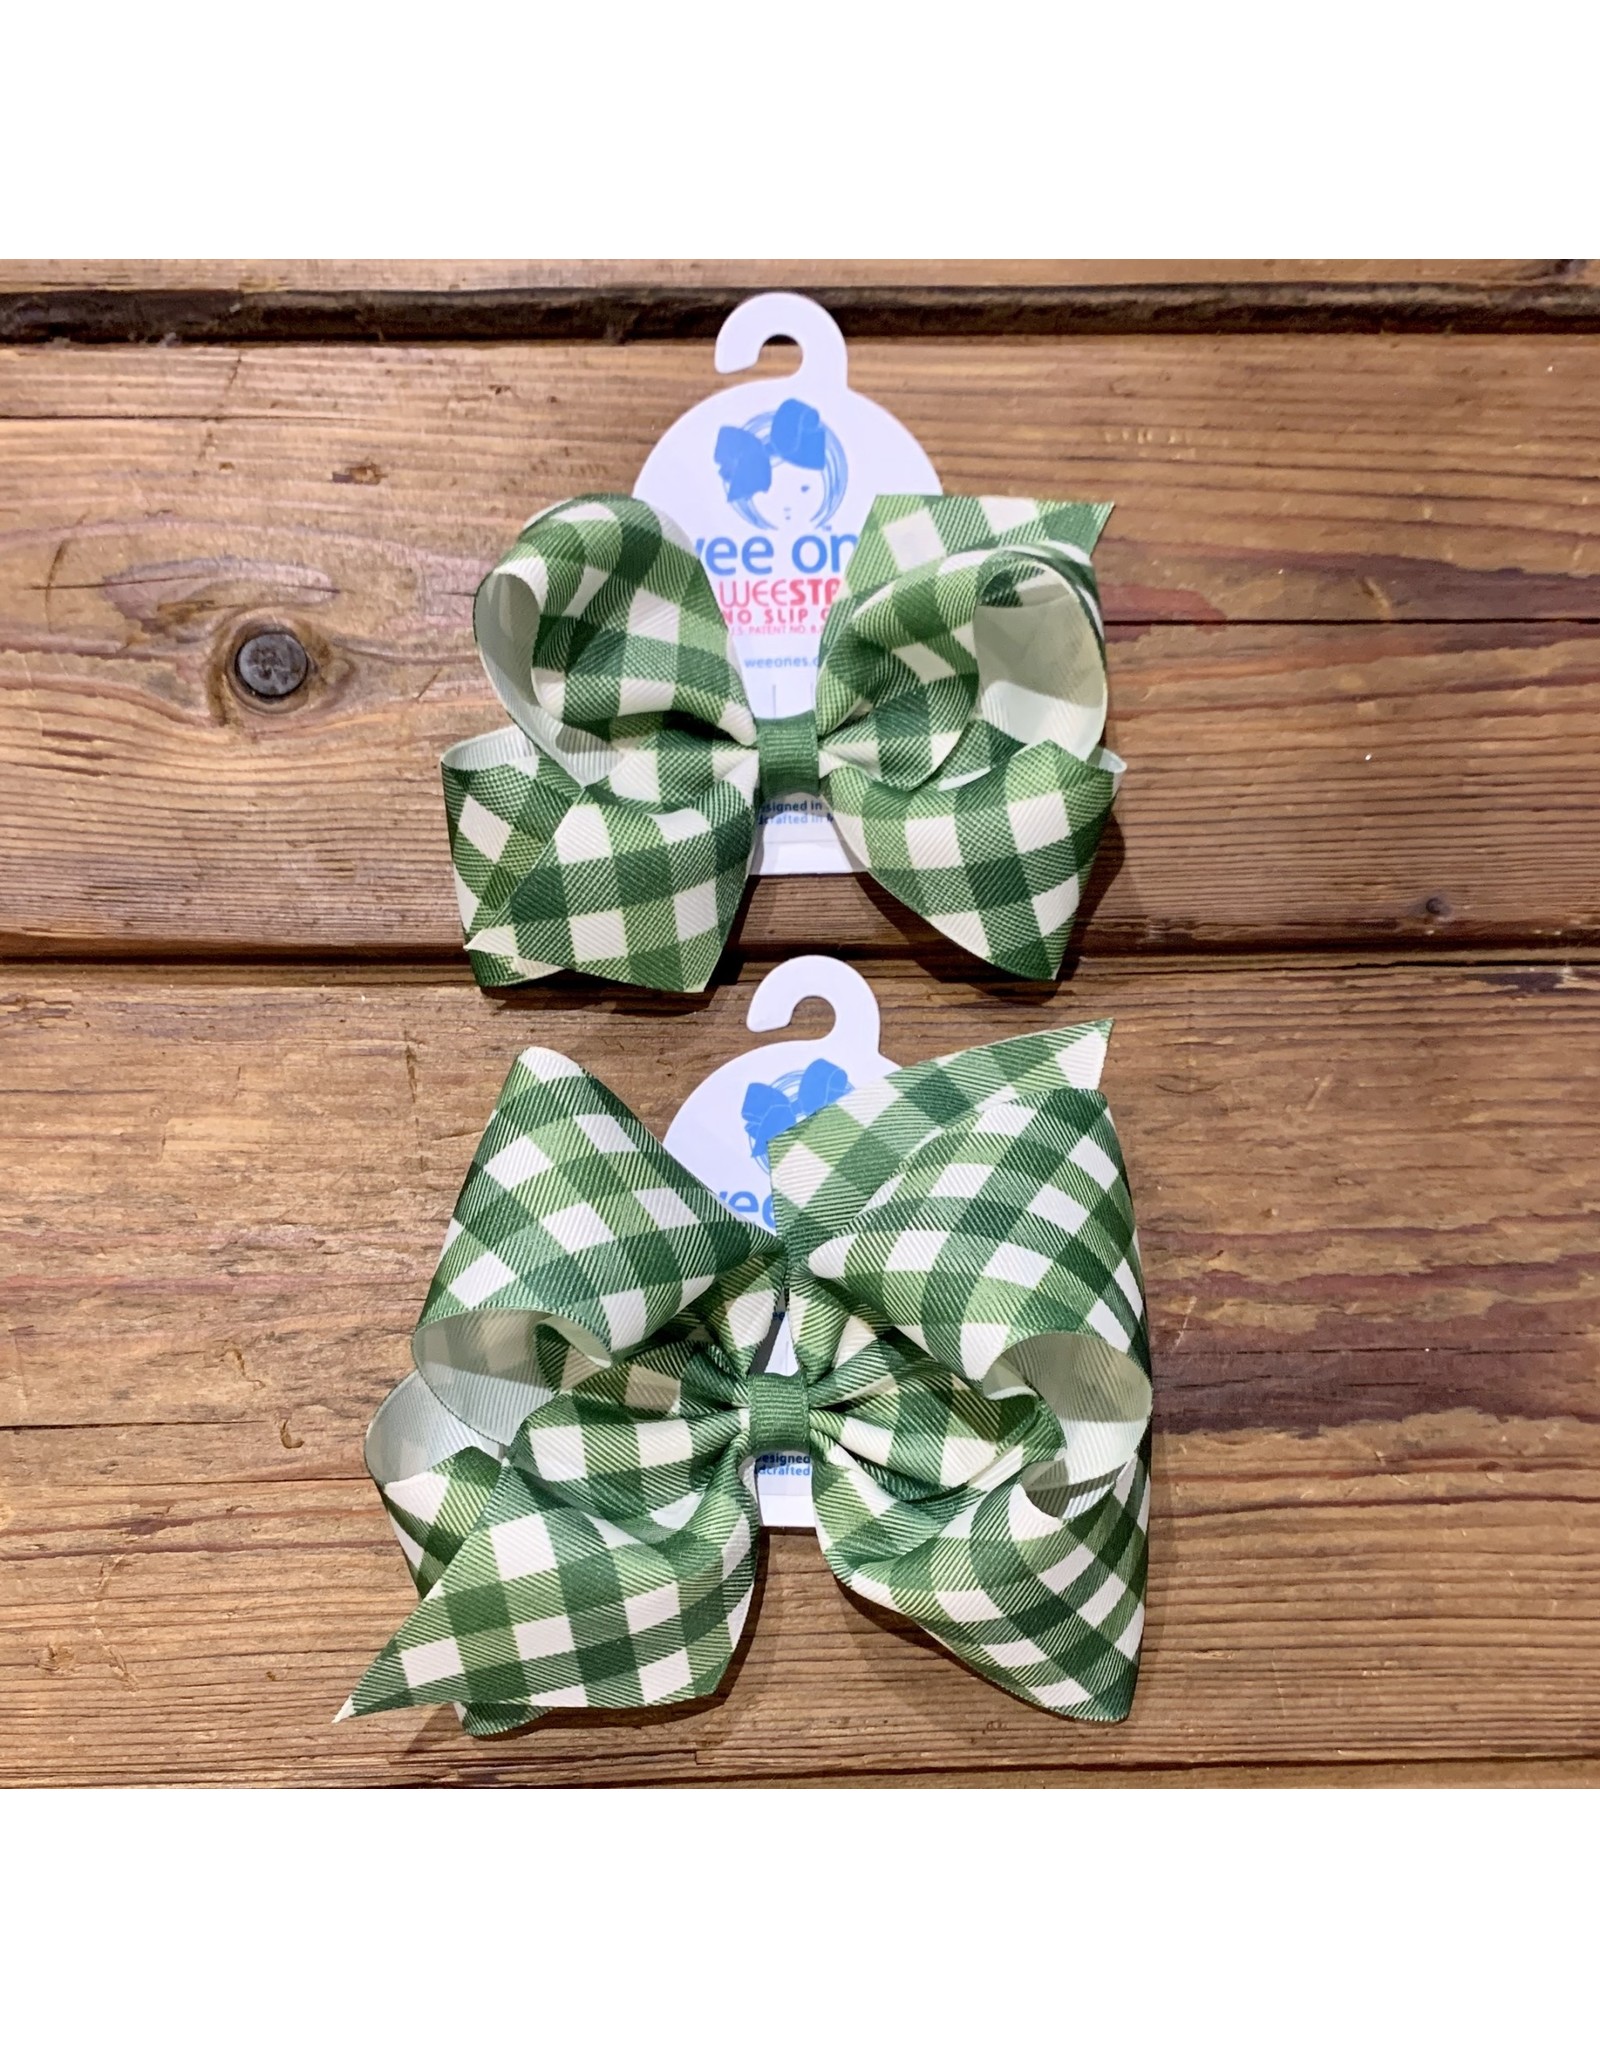 Wee Ones - Green Plaid Harvest Bow